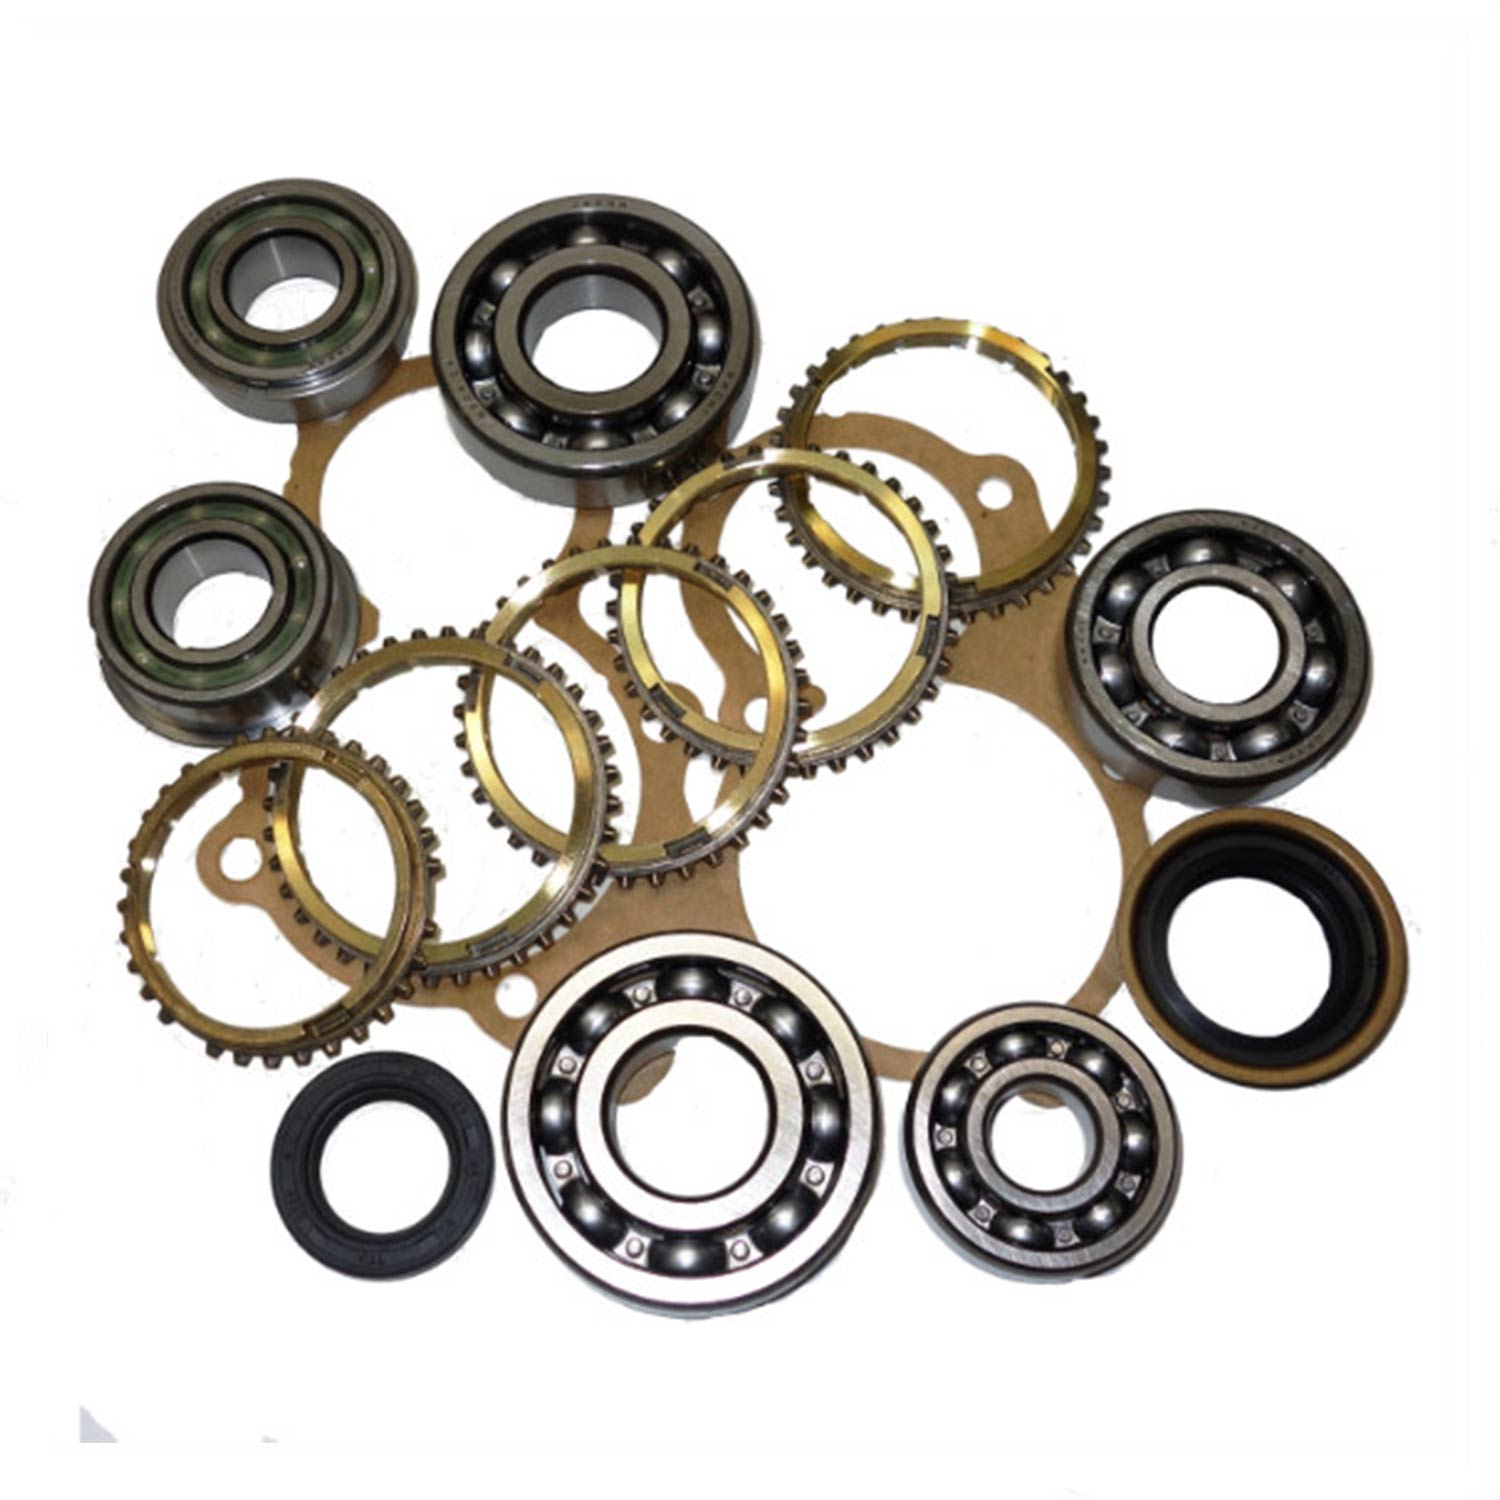 USA Standard 73523 Manual Transmission Bearing Kit, 90 & Up Mazda 5Spd, With Synchro'S